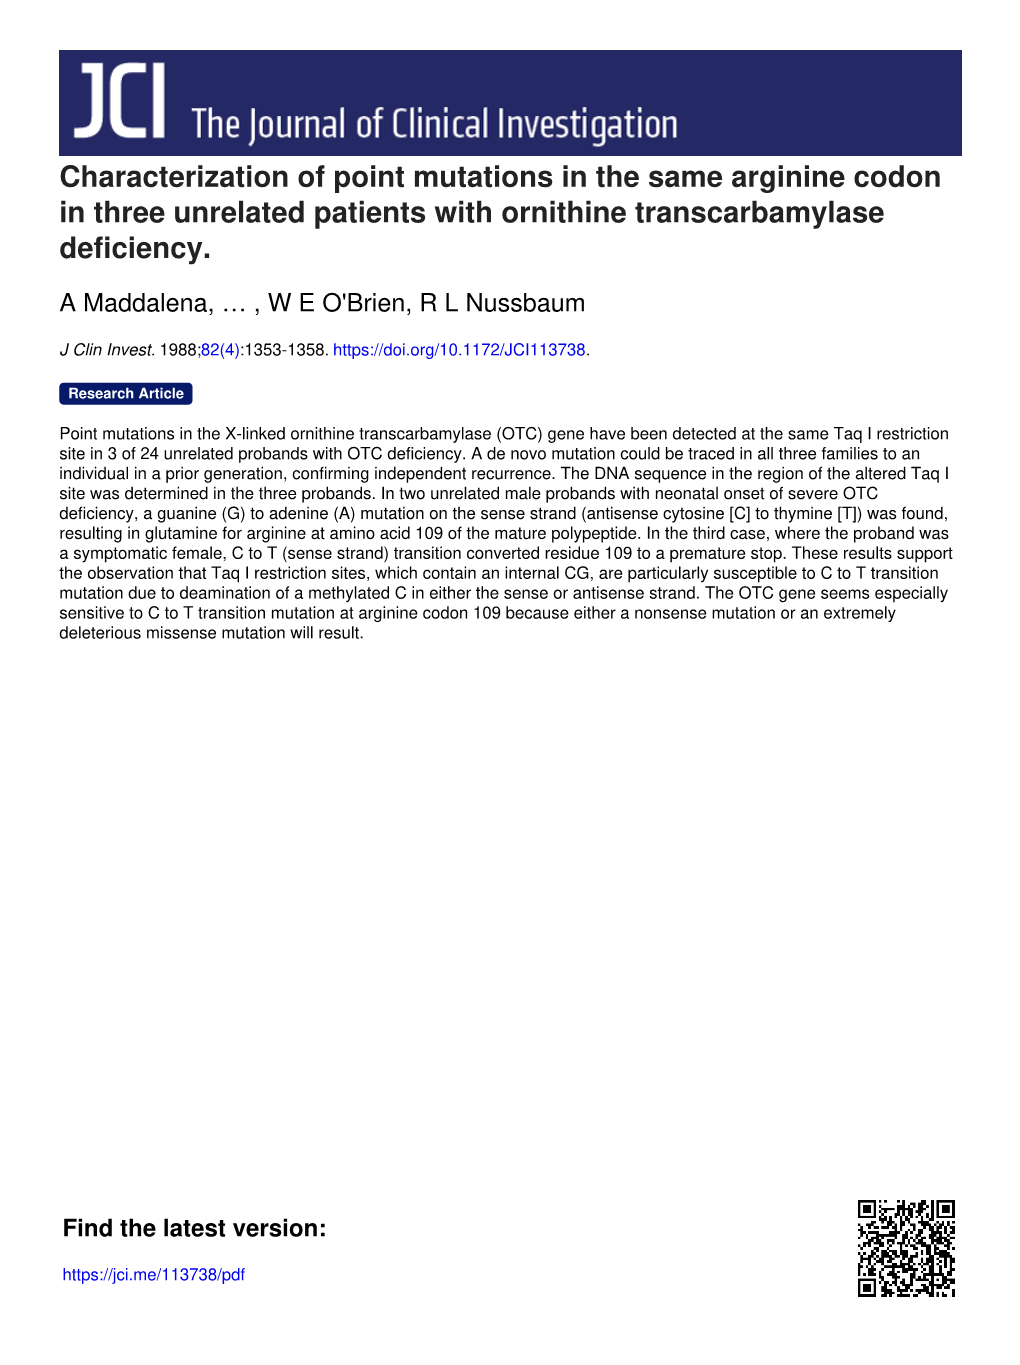 Characterization of Point Mutations in the Same Arginine Codon in Three Unrelated Patients with Ornithine Transcarbamylase Deficiency